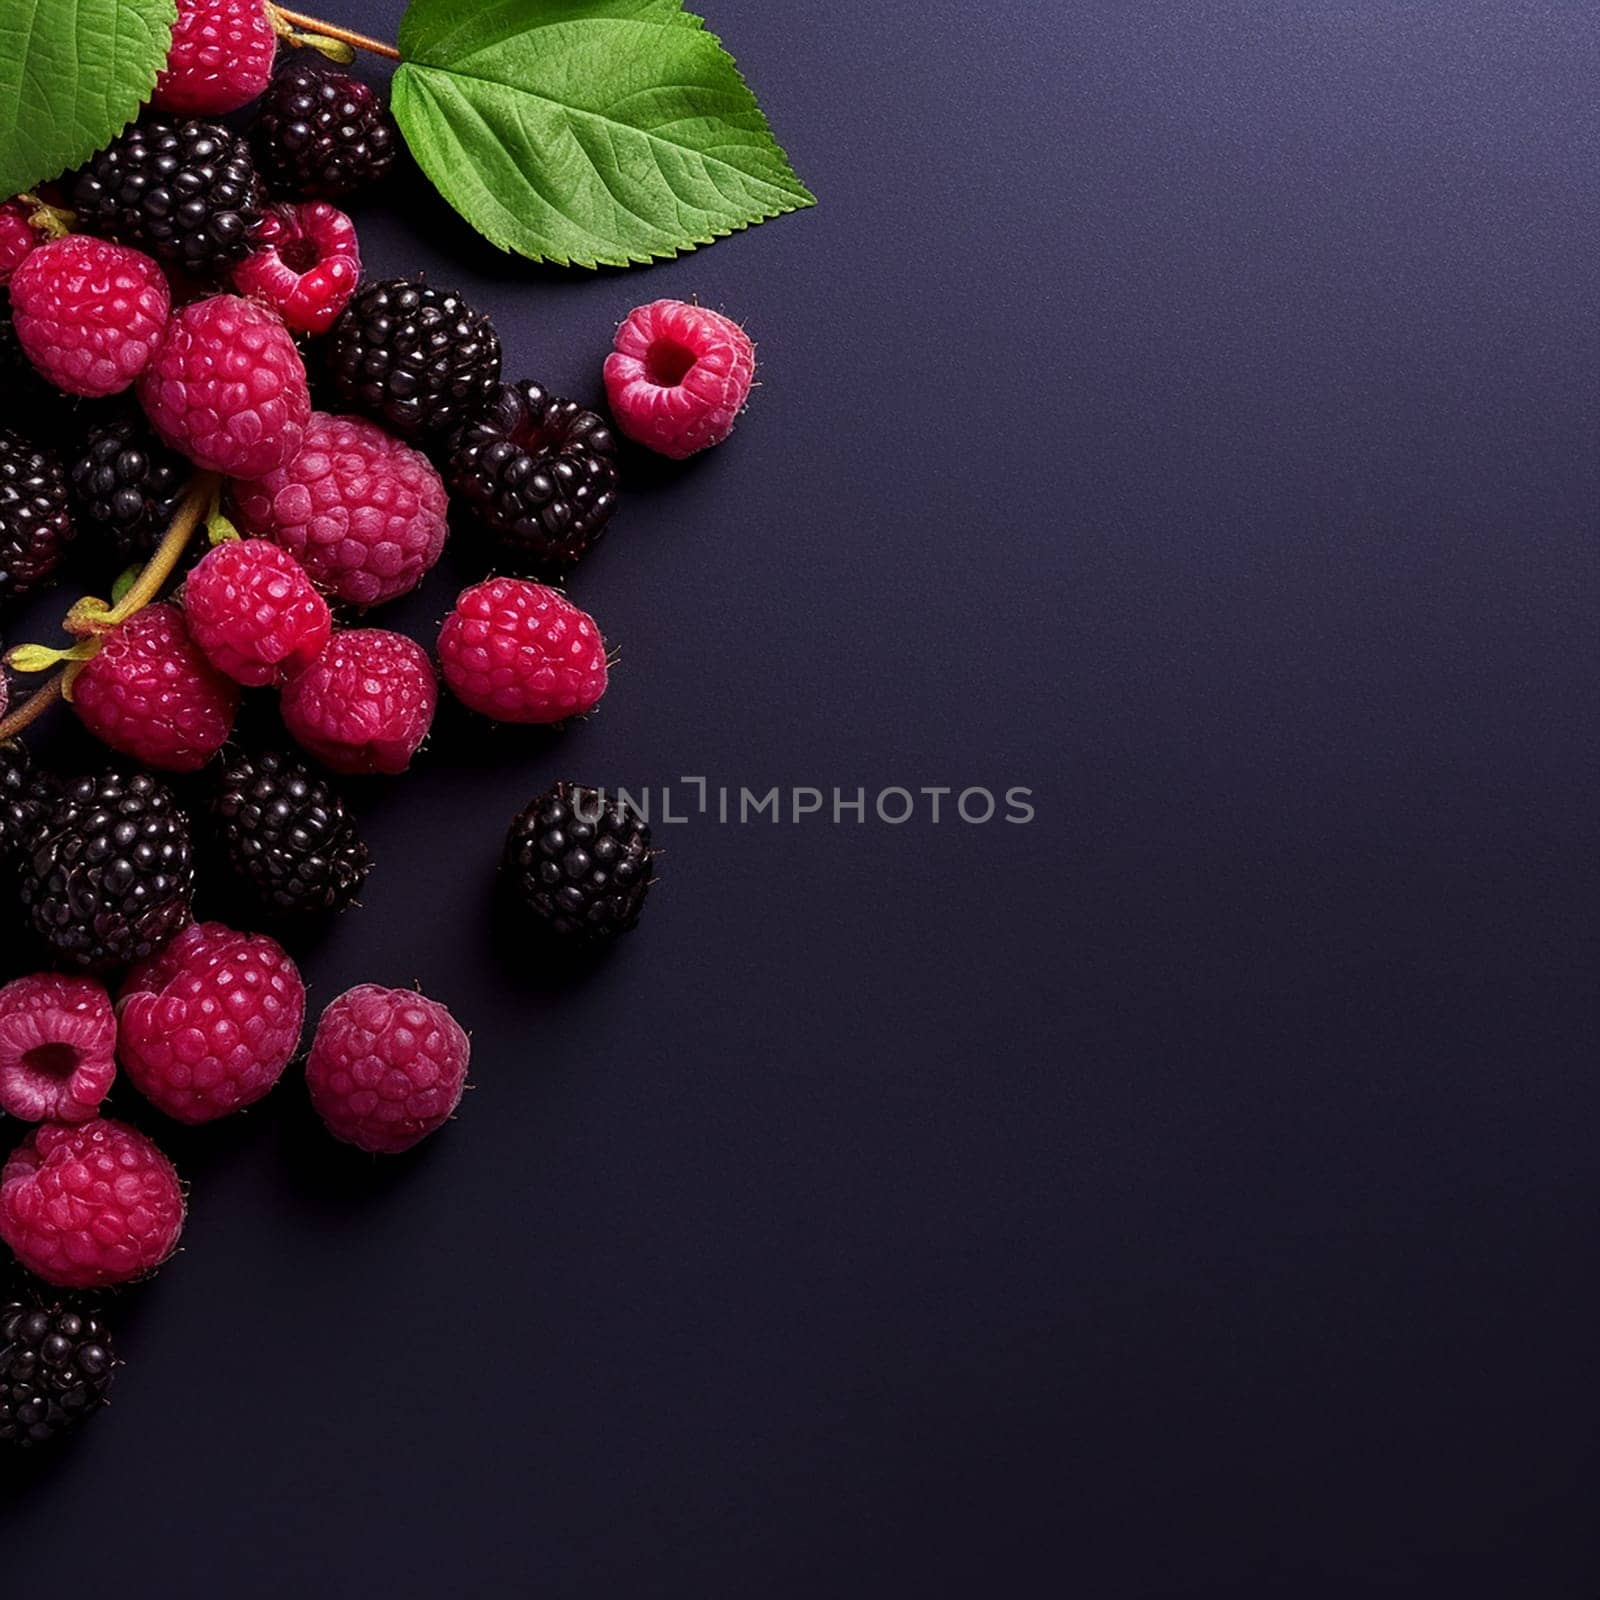 Ripe blackberries and raspberries on a branch with green leaves against a dark background.